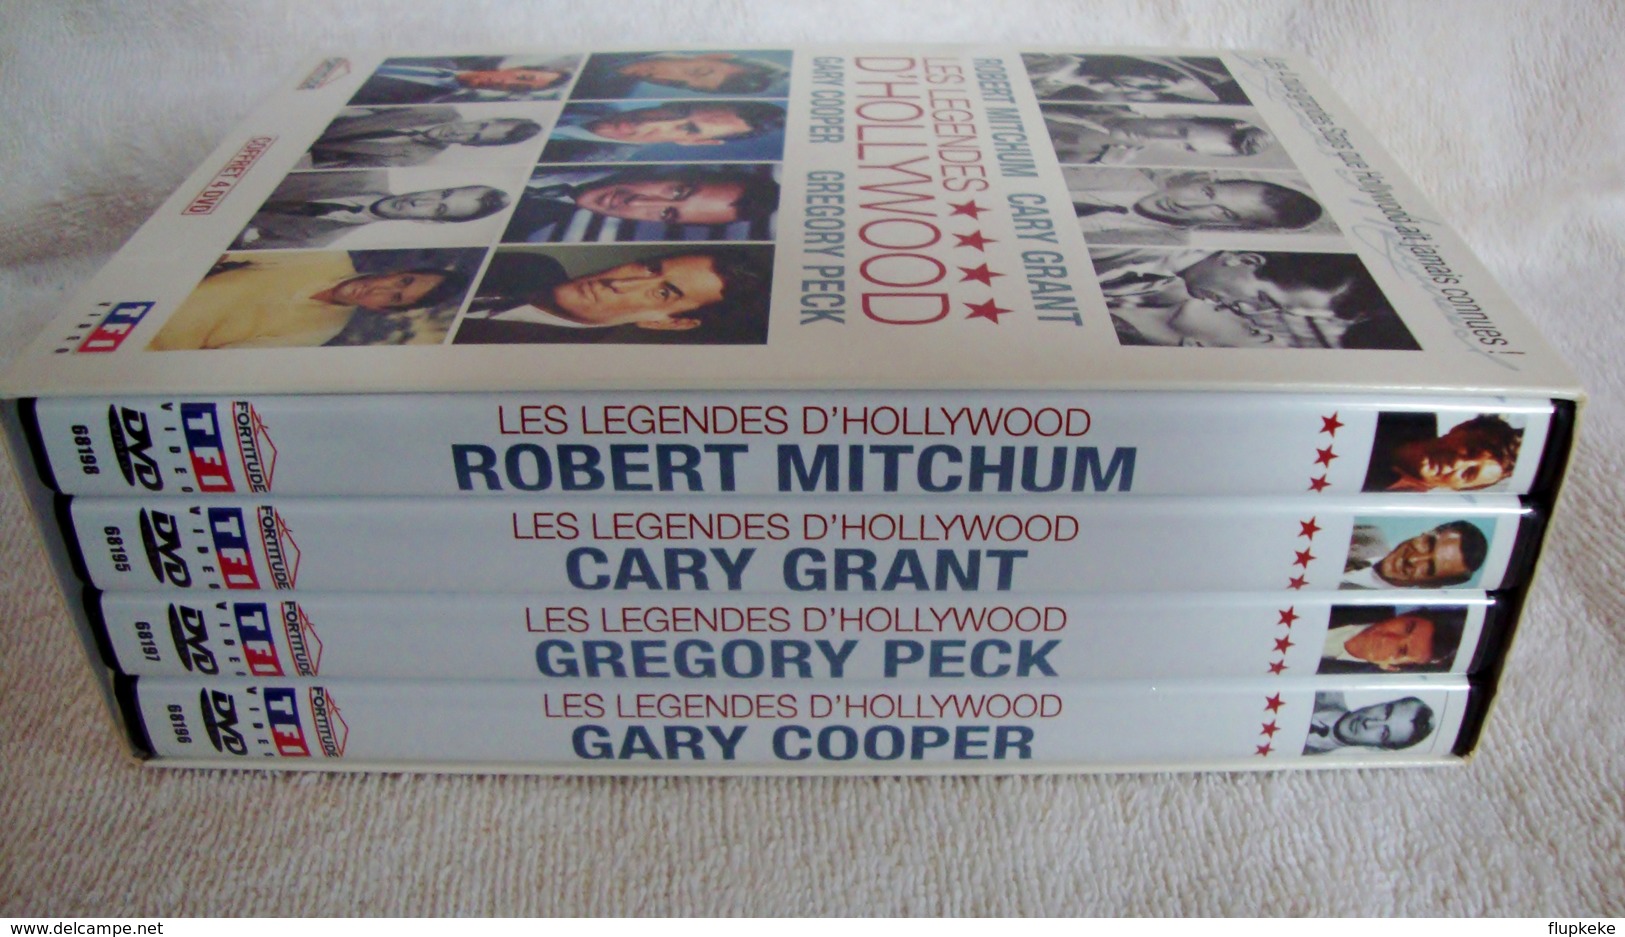 Dvd Zone 2 Les Légendes d'Hollywood Robert Mitchum, Cary Grant, Gary Cooper, Gregory Peck Firtitude Tf1 (2007) 4 dvd Vos